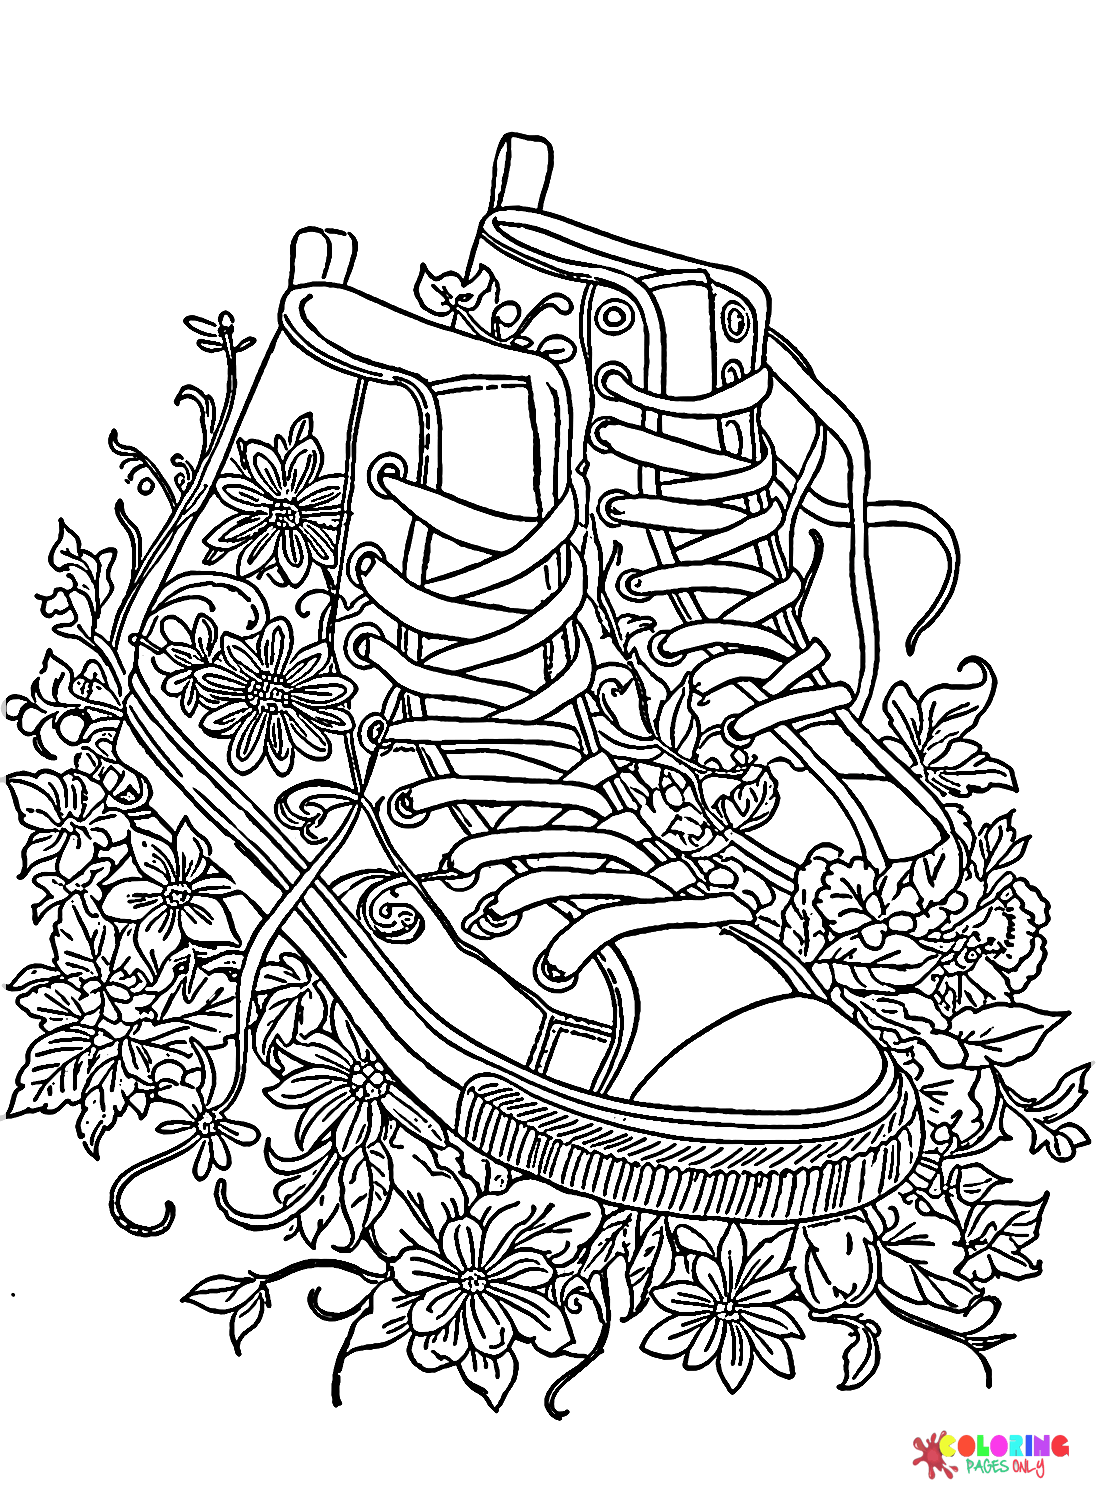 Sneakers and Flowers from Sneaker